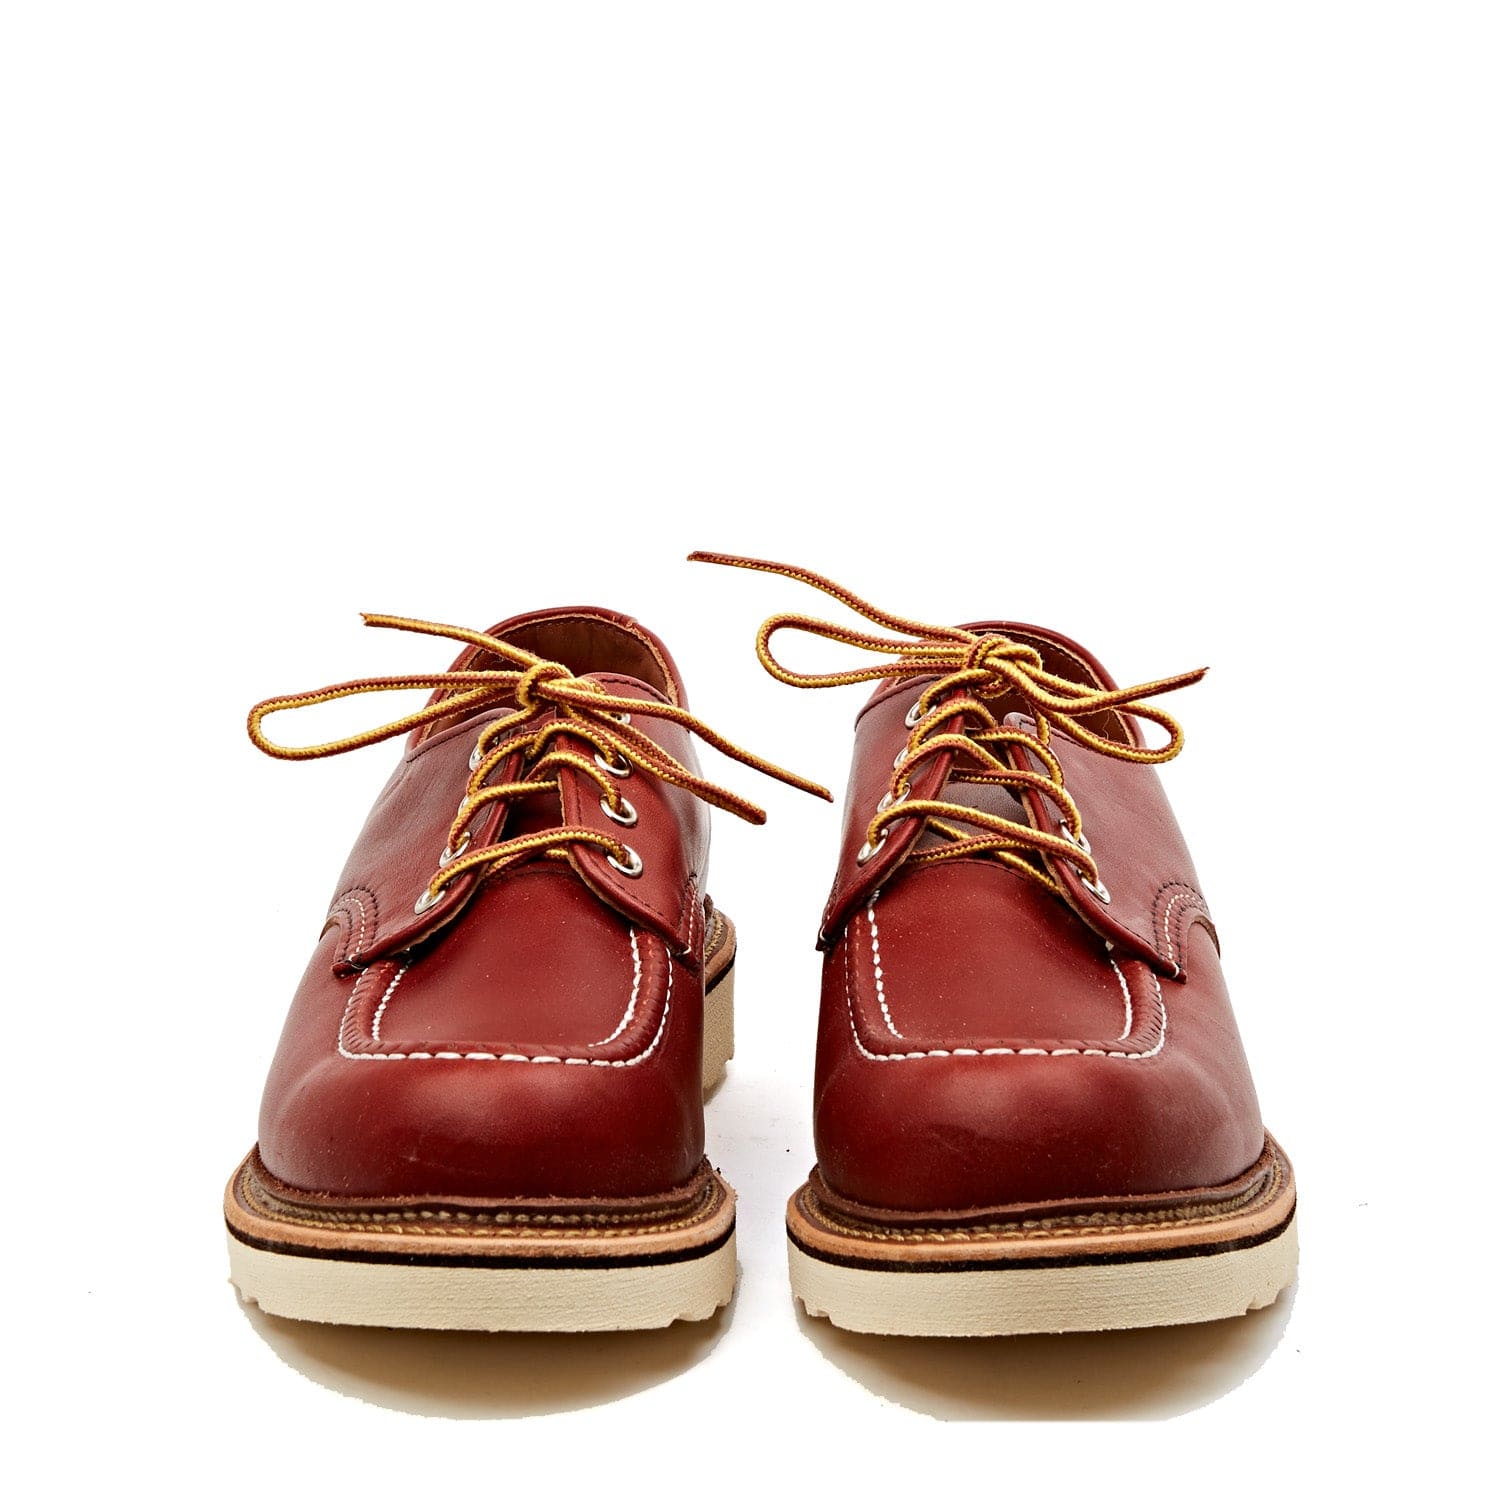 red wing 813 oxford oro russet